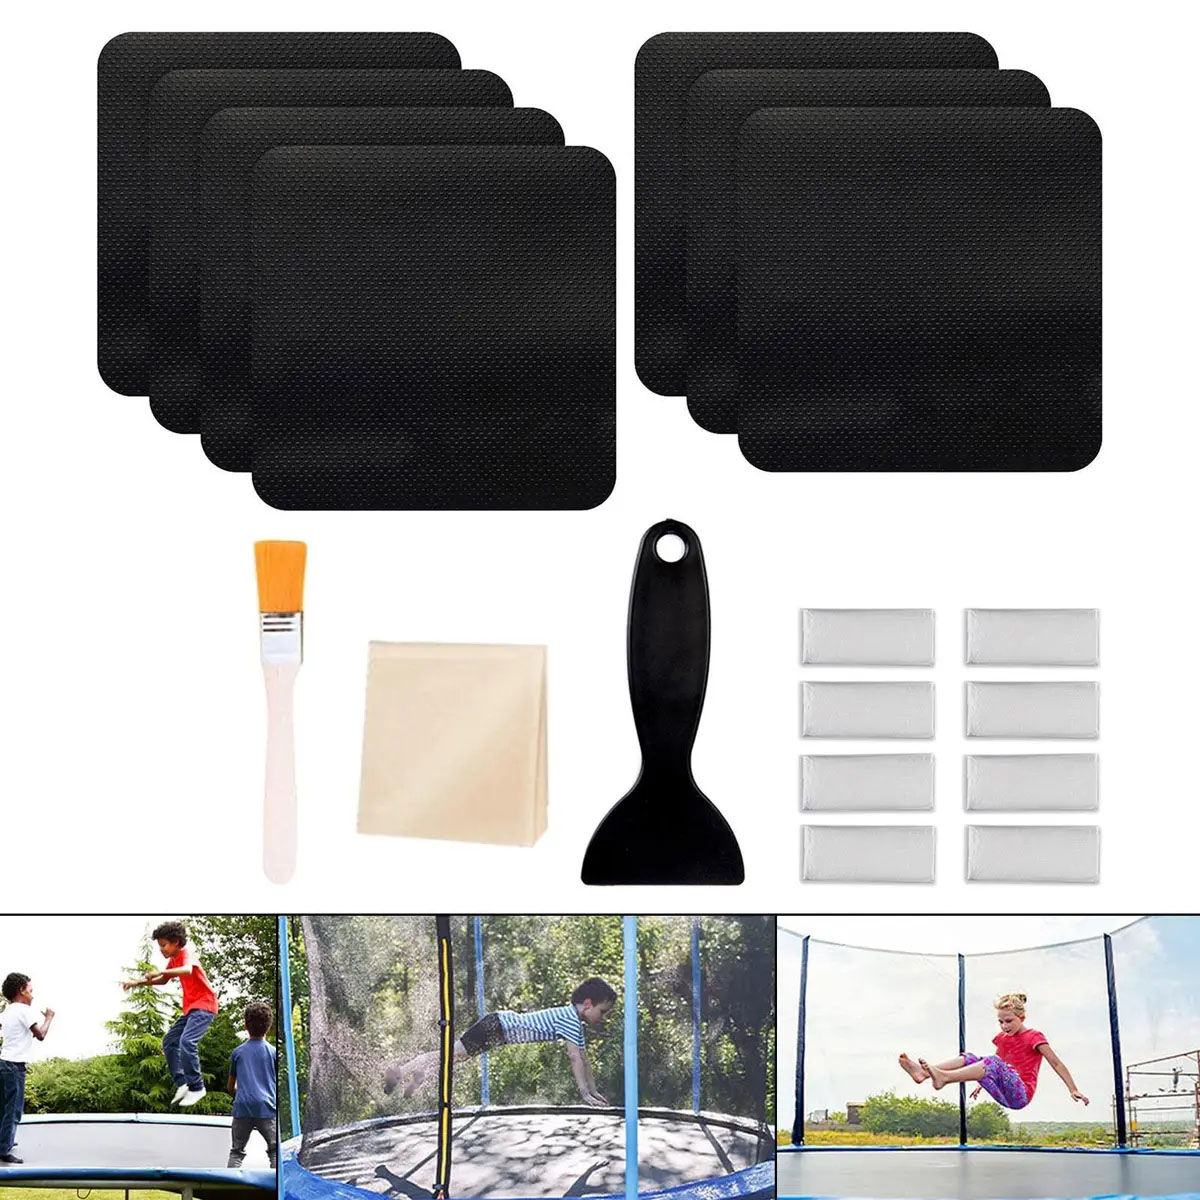 ifeolo Trampoline Patch Repair Kit 4X 4 Square on Patches Repair Trampoline Mat Tear or Hole in A Trampoline Mat(2 Piece)